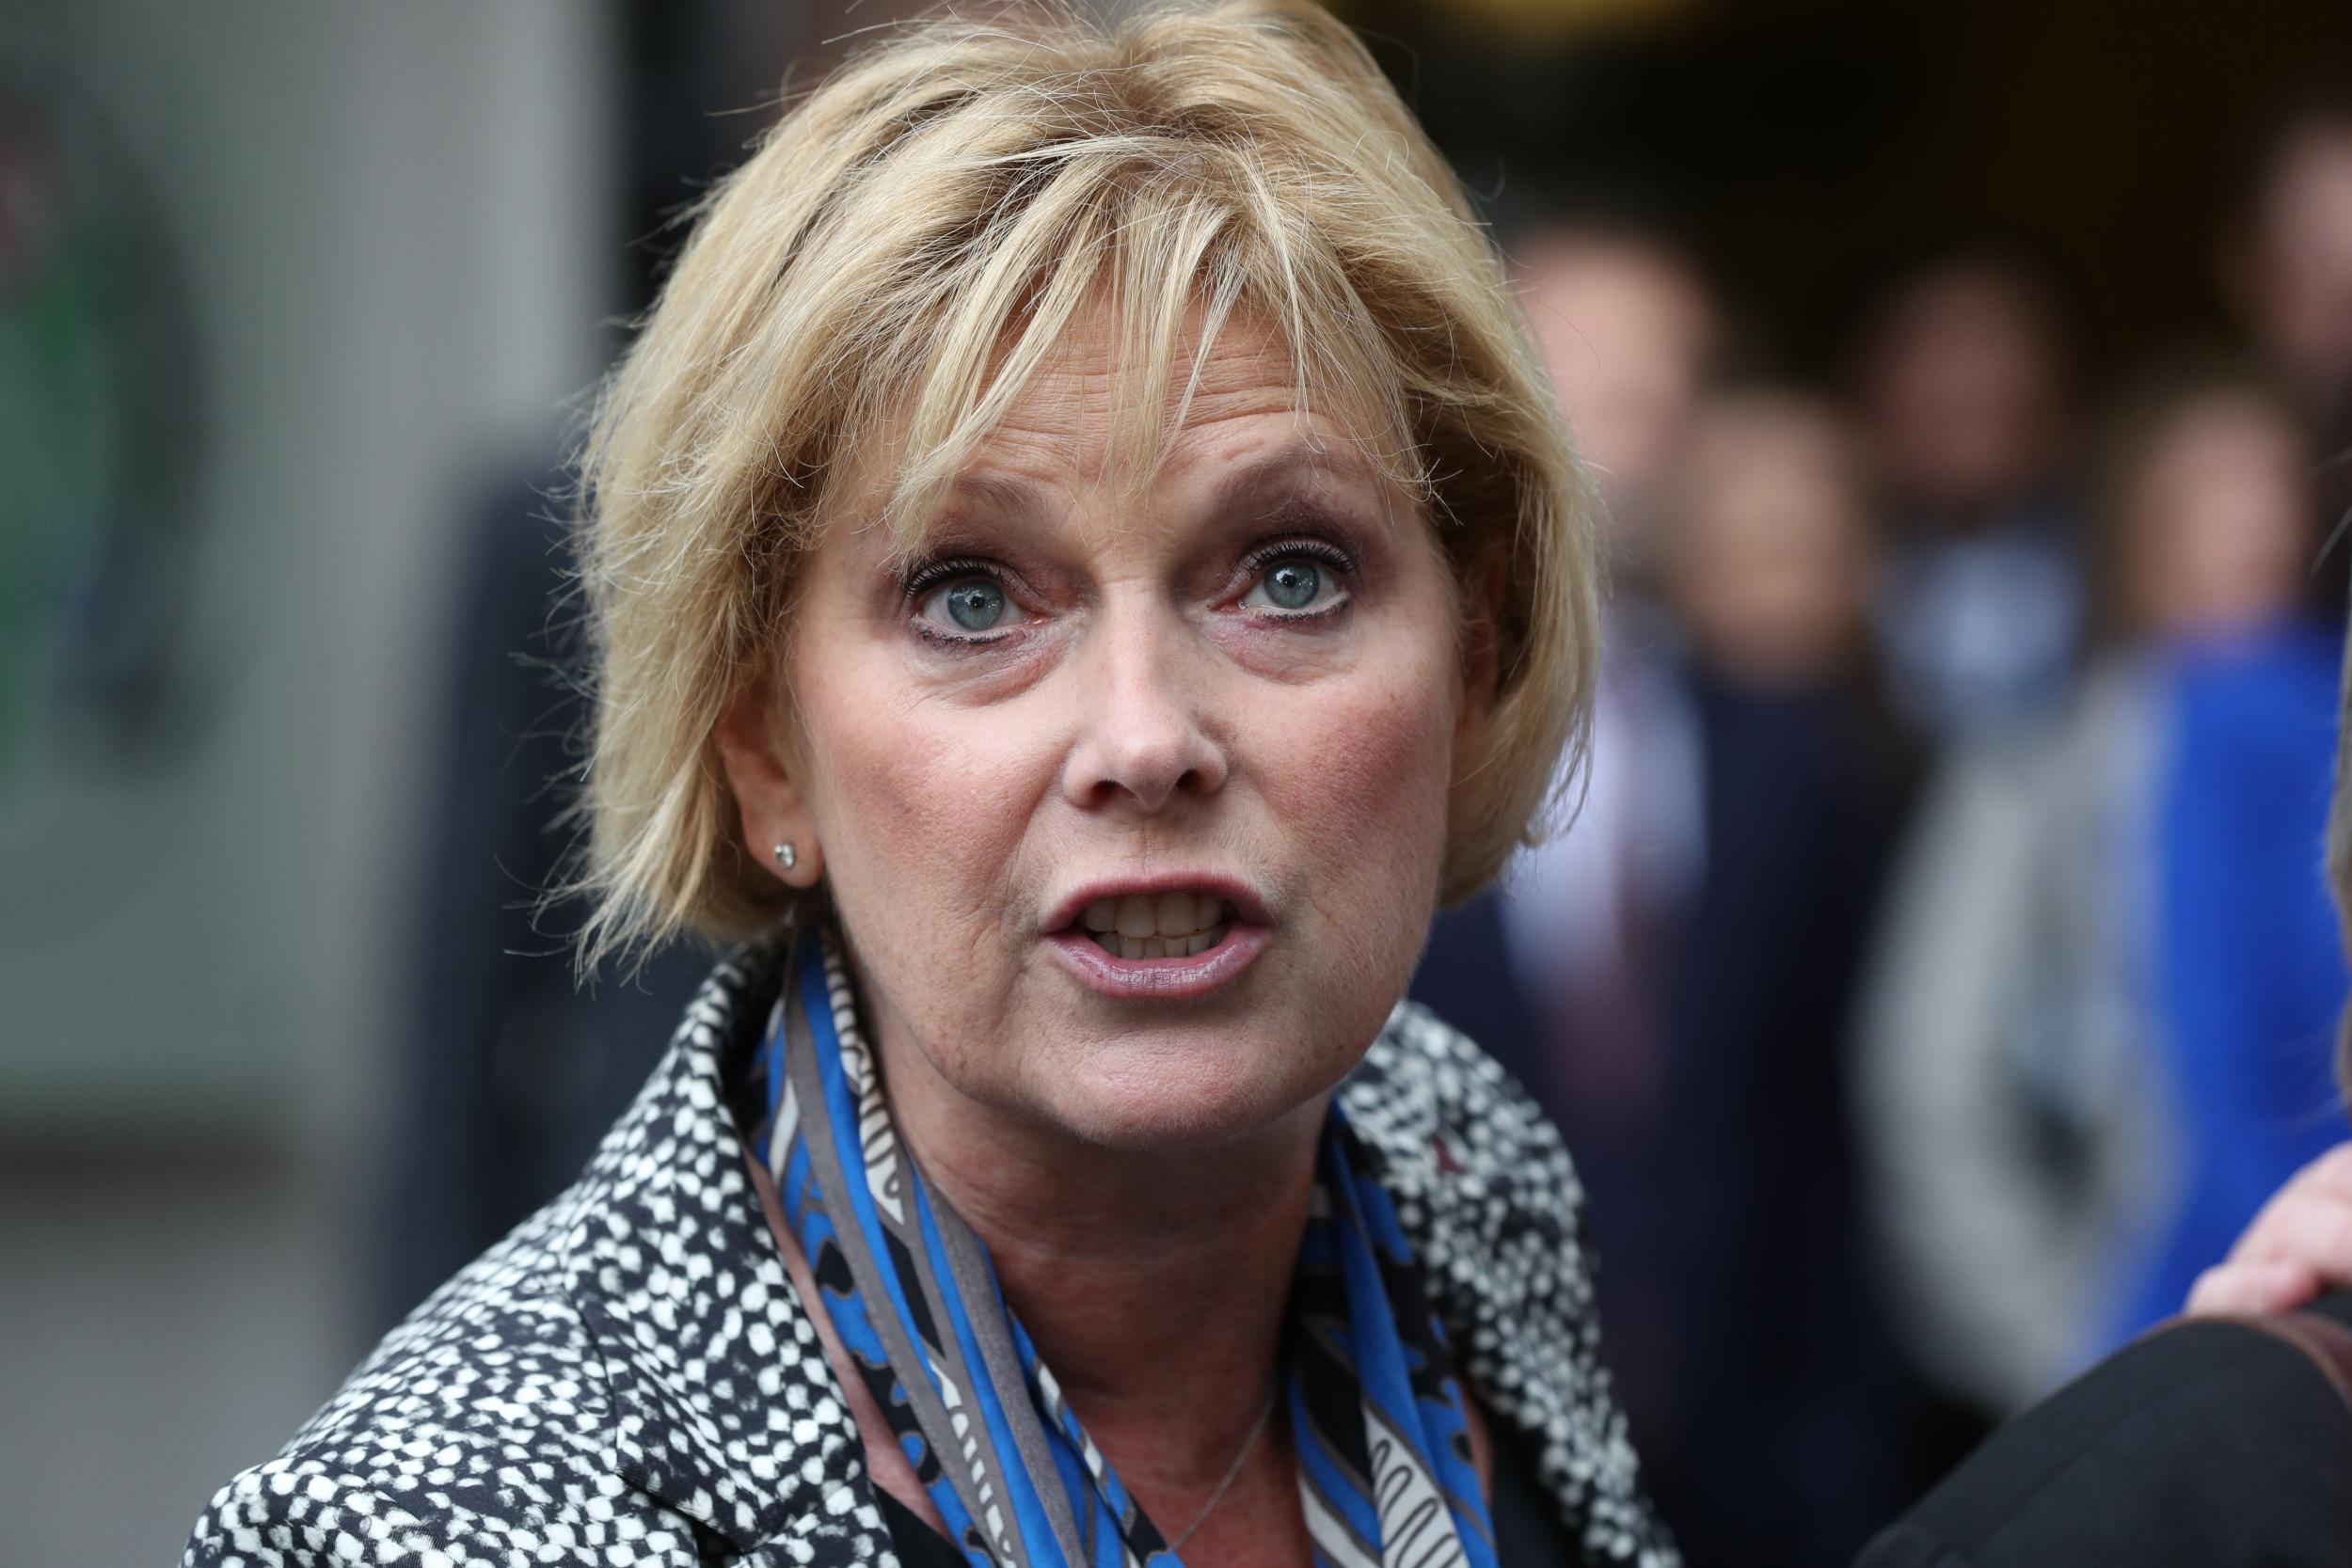 Anna Soubry - The Independent Group for Change